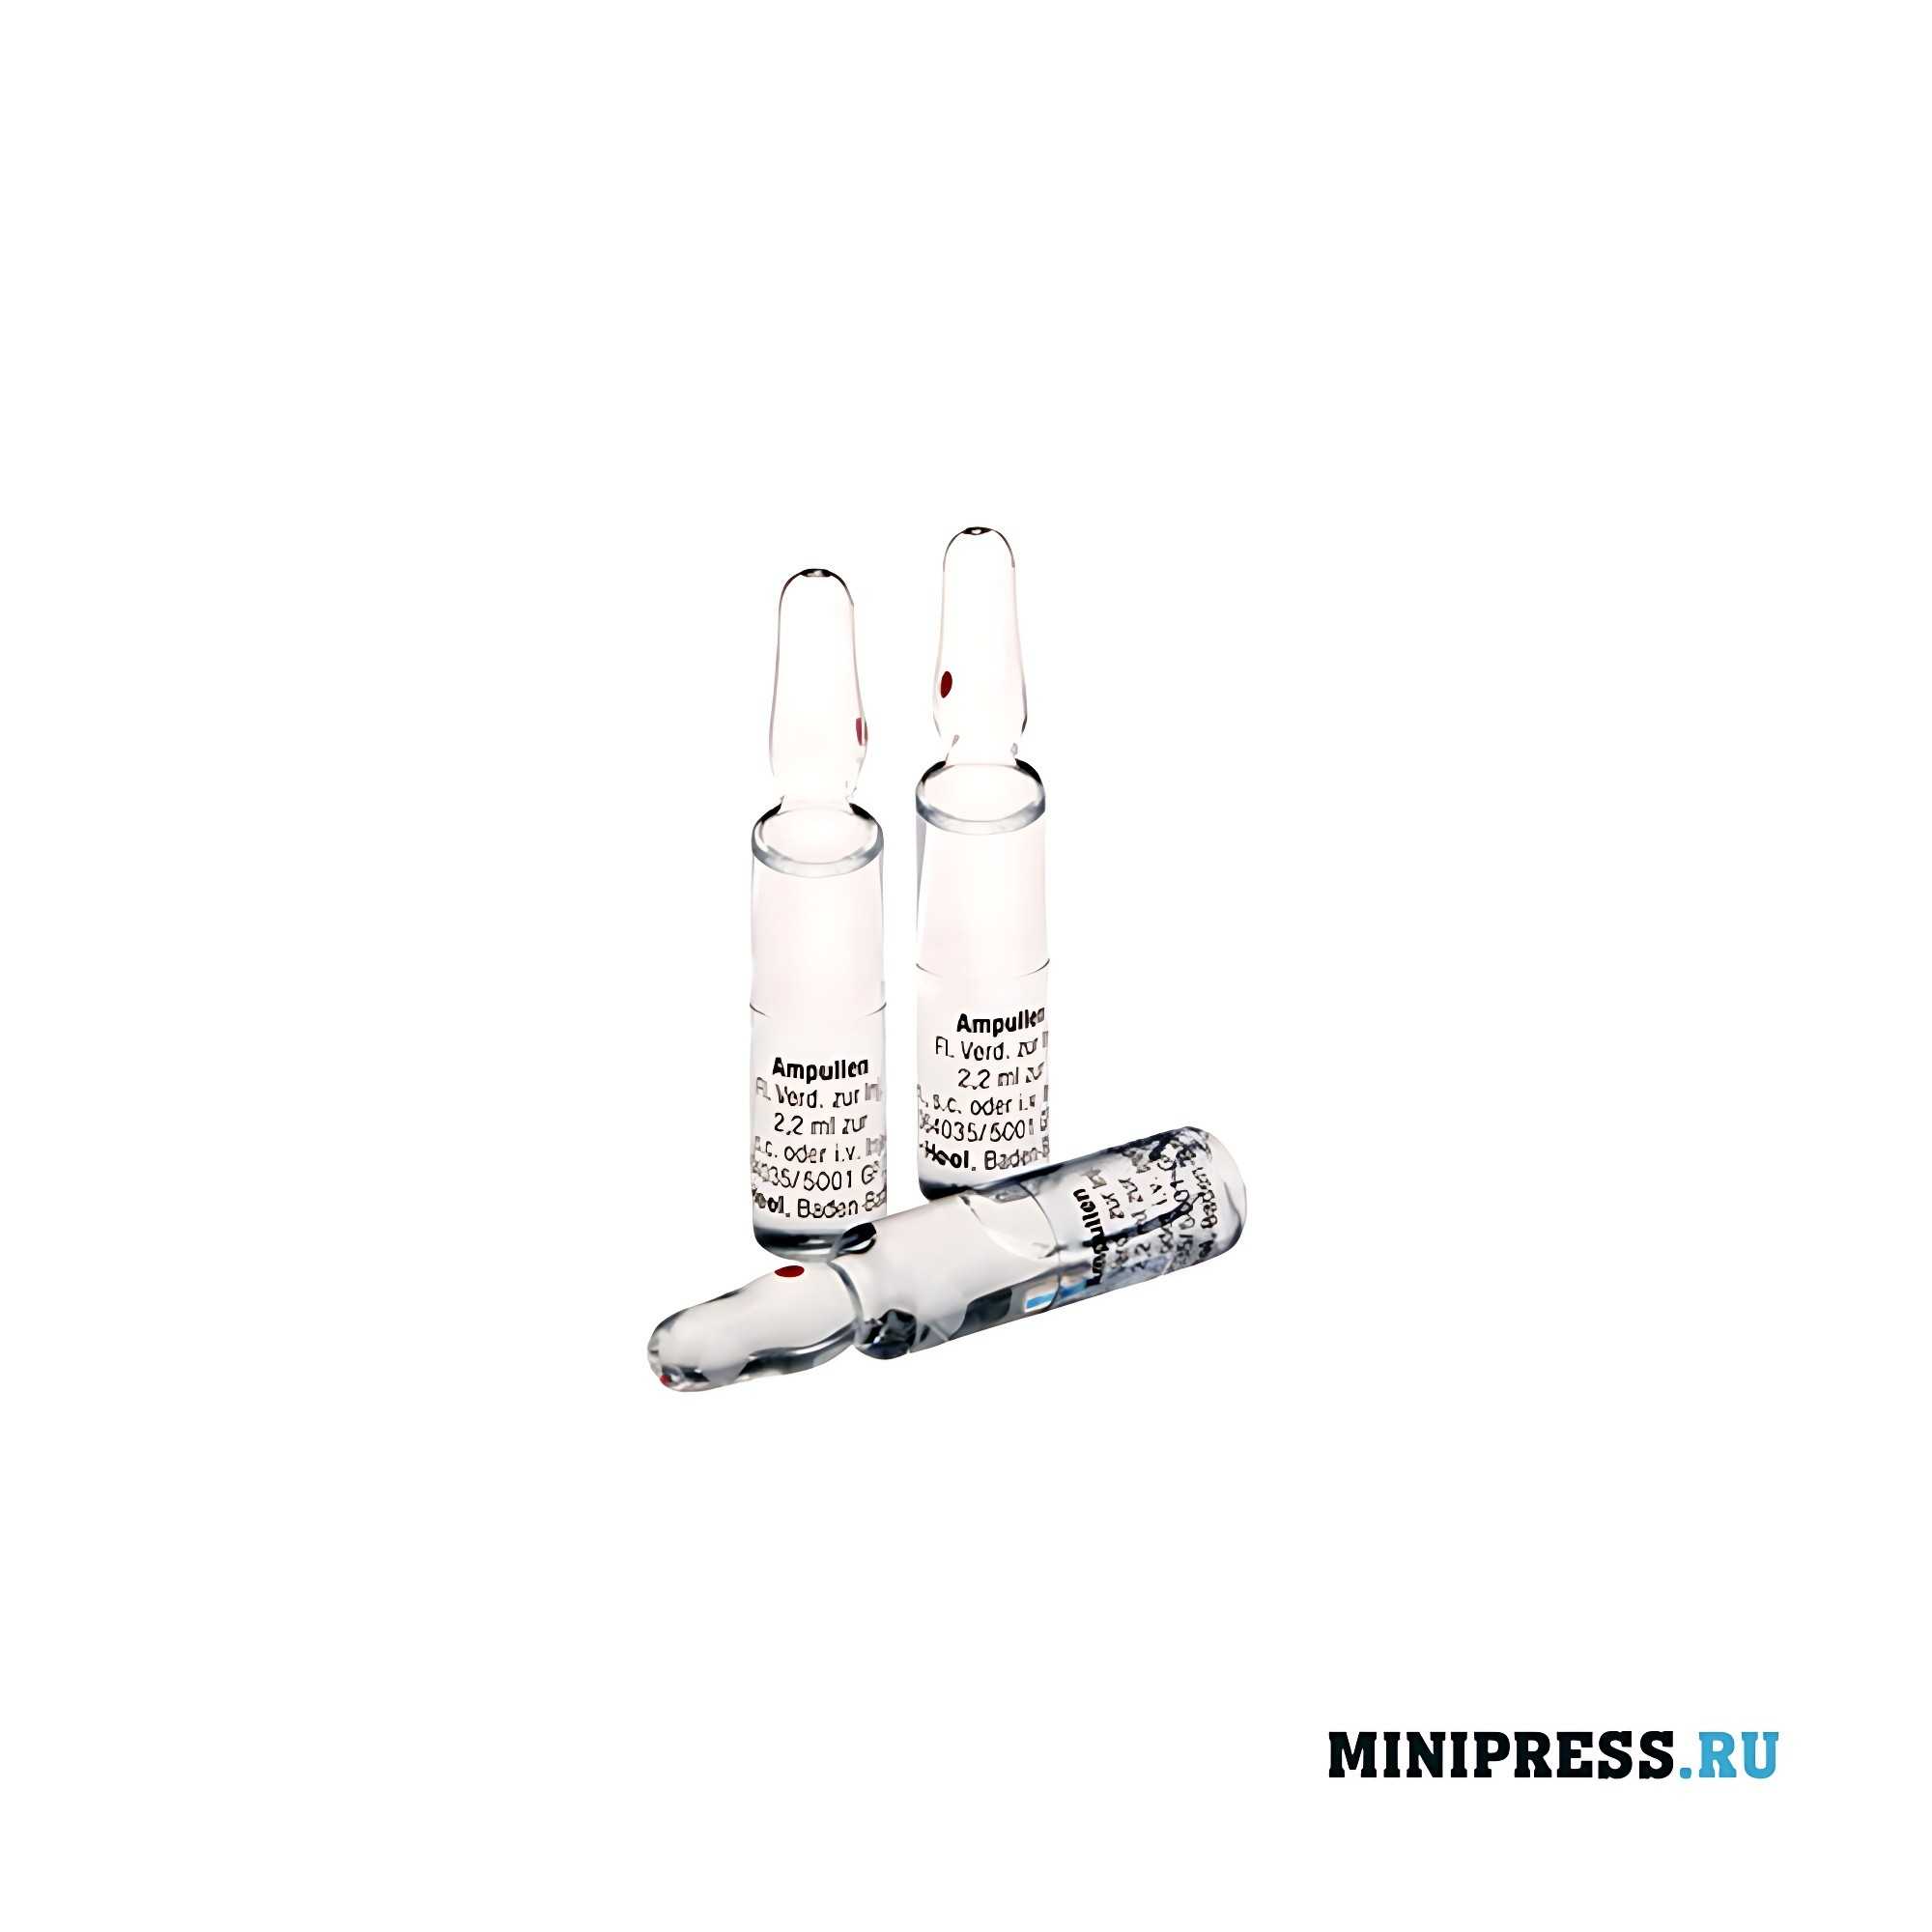 High-speed equipment for labeling vials and ampoules SHLM 75